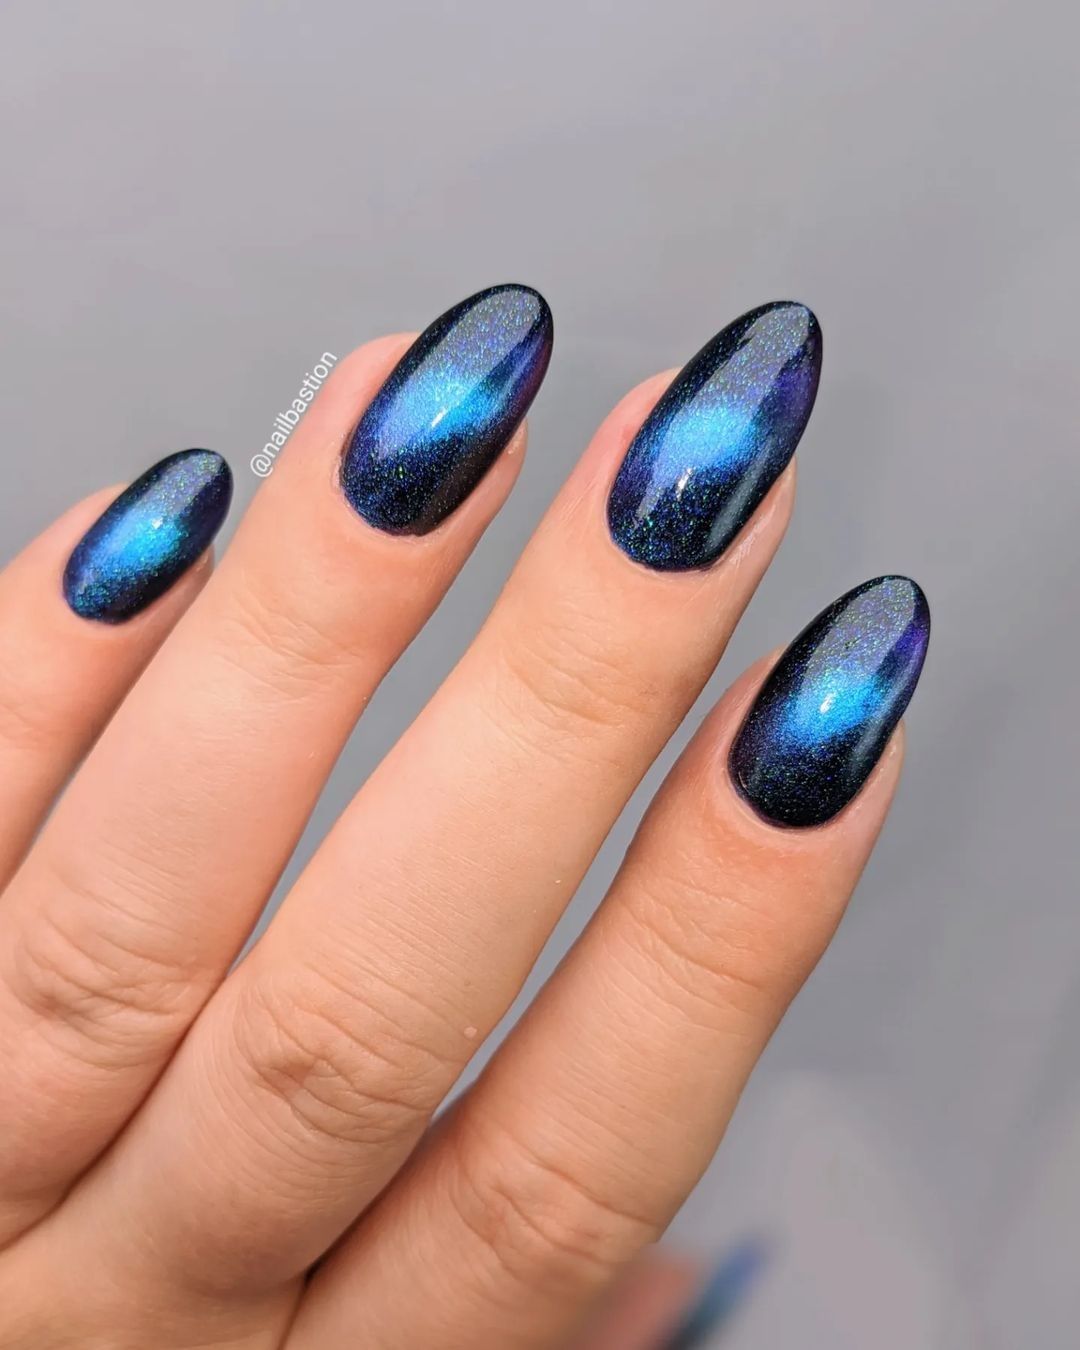 This magnetic blue nail polish seems like it gives the space vibes. Dark and light blue are combined together to make you stand out from the crowd!